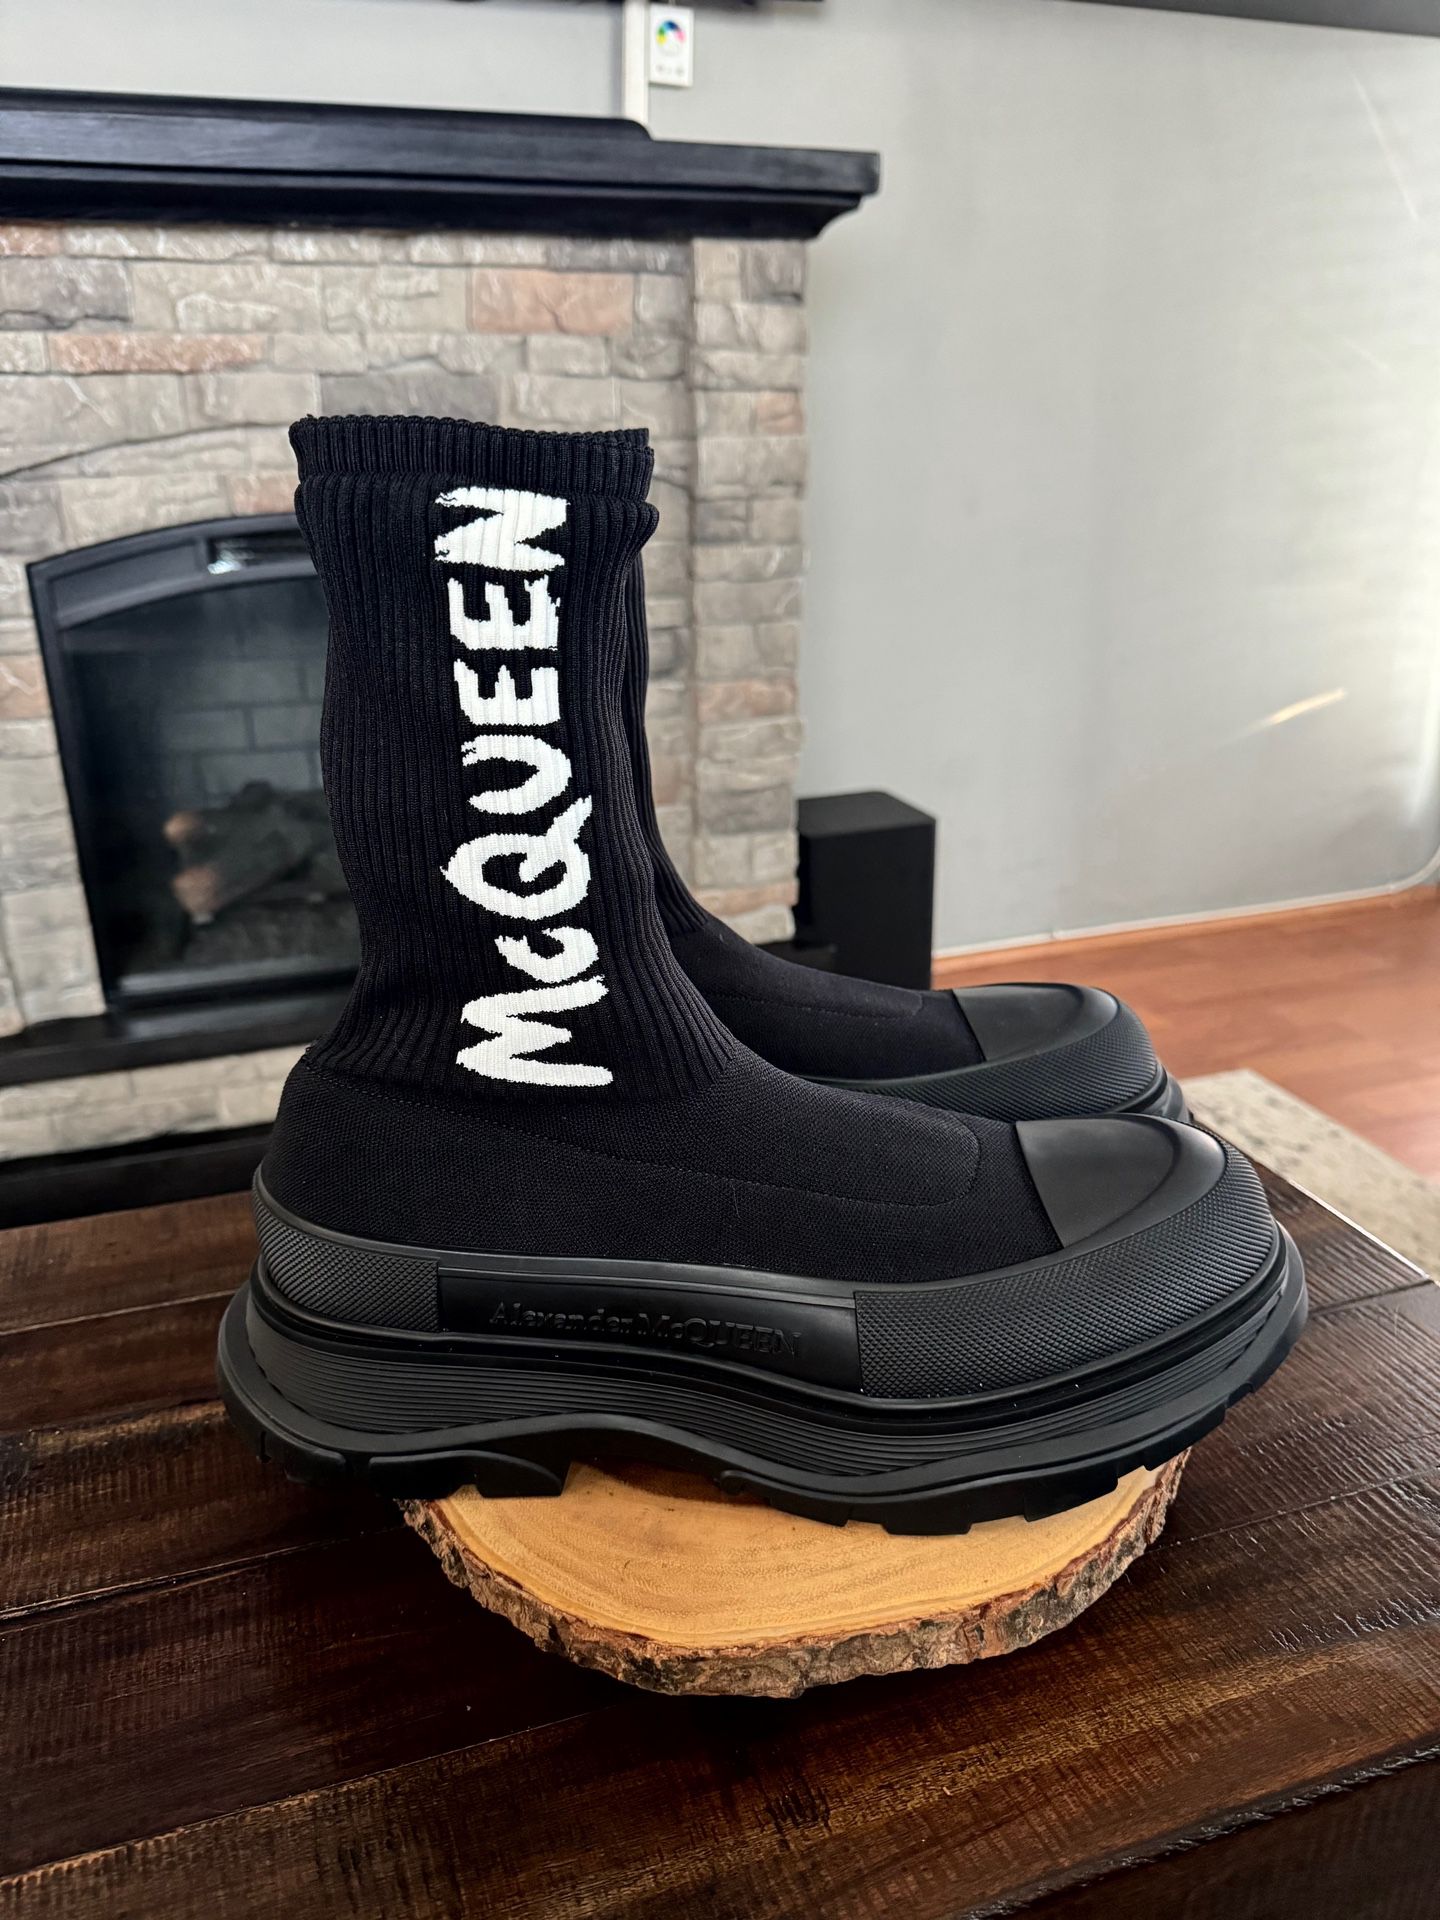 New! Men’s Alexander McQueen graffiti Tread sock sneaker boot. Size 13.5(46.5) Retail $990. 100% Authentic with box and dust bag. Brand new worn. 